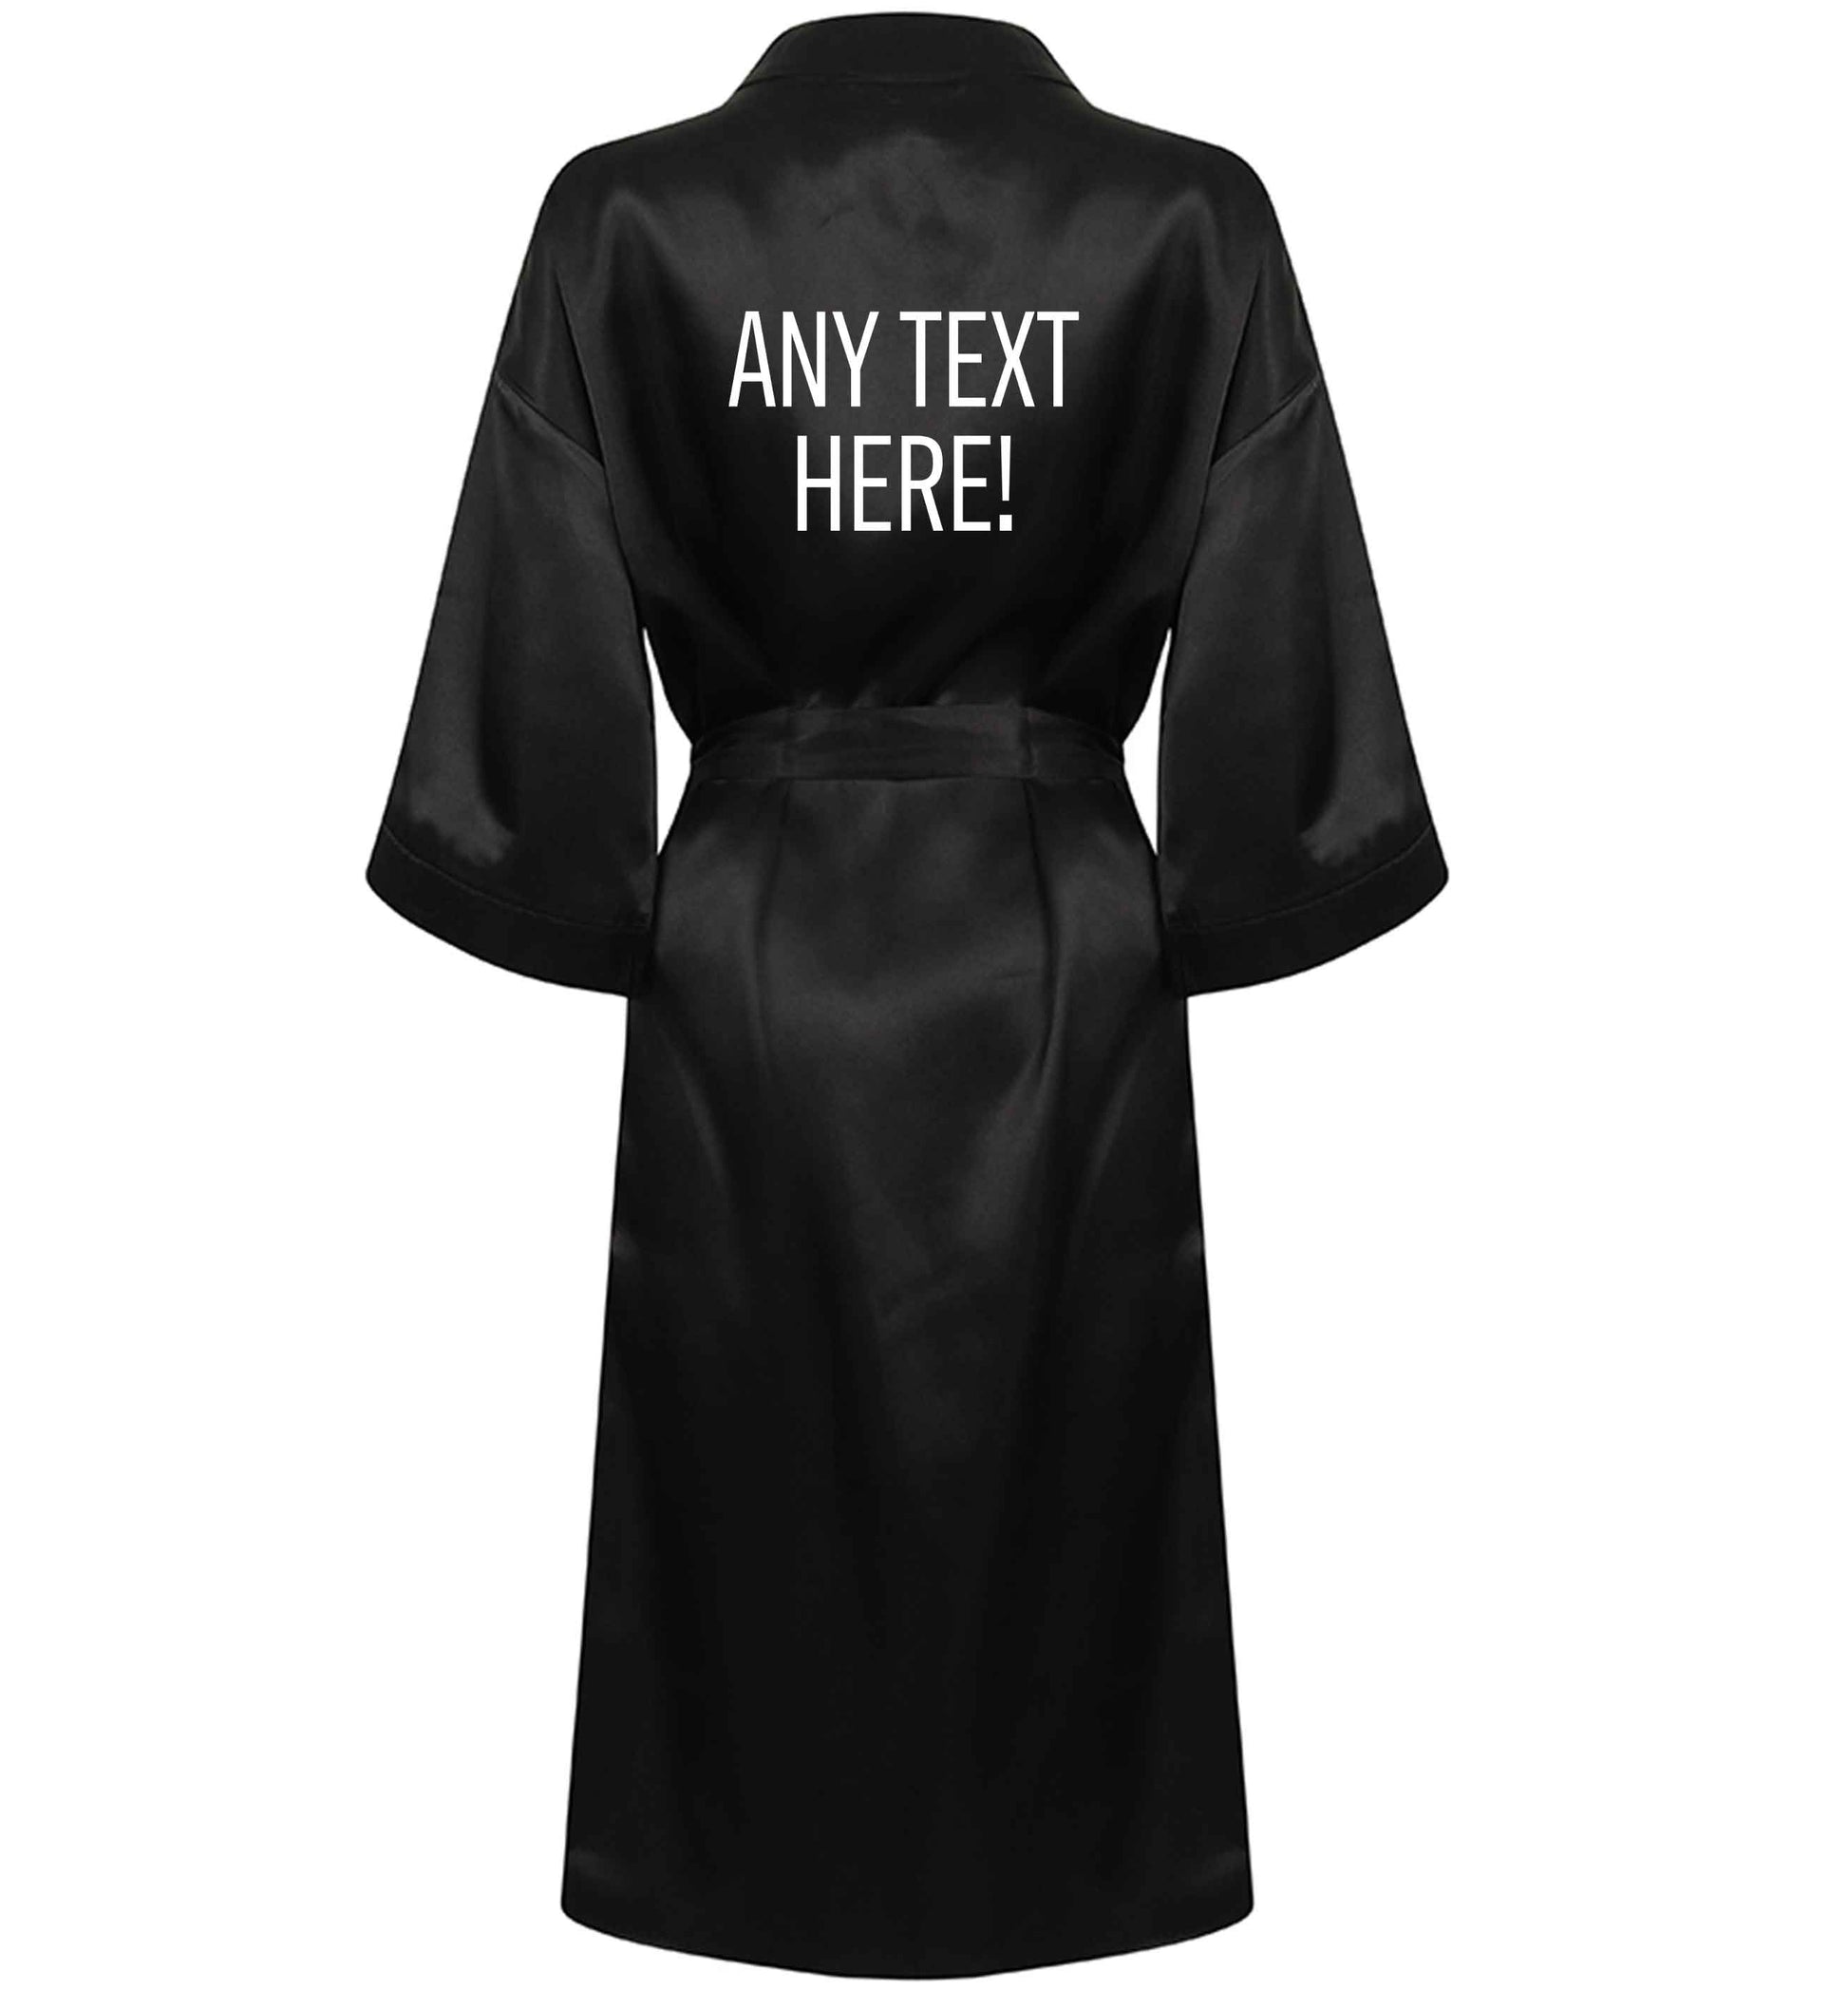 Happy Easter - personalised XL/XXL black ladies dressing  gown size 16/18